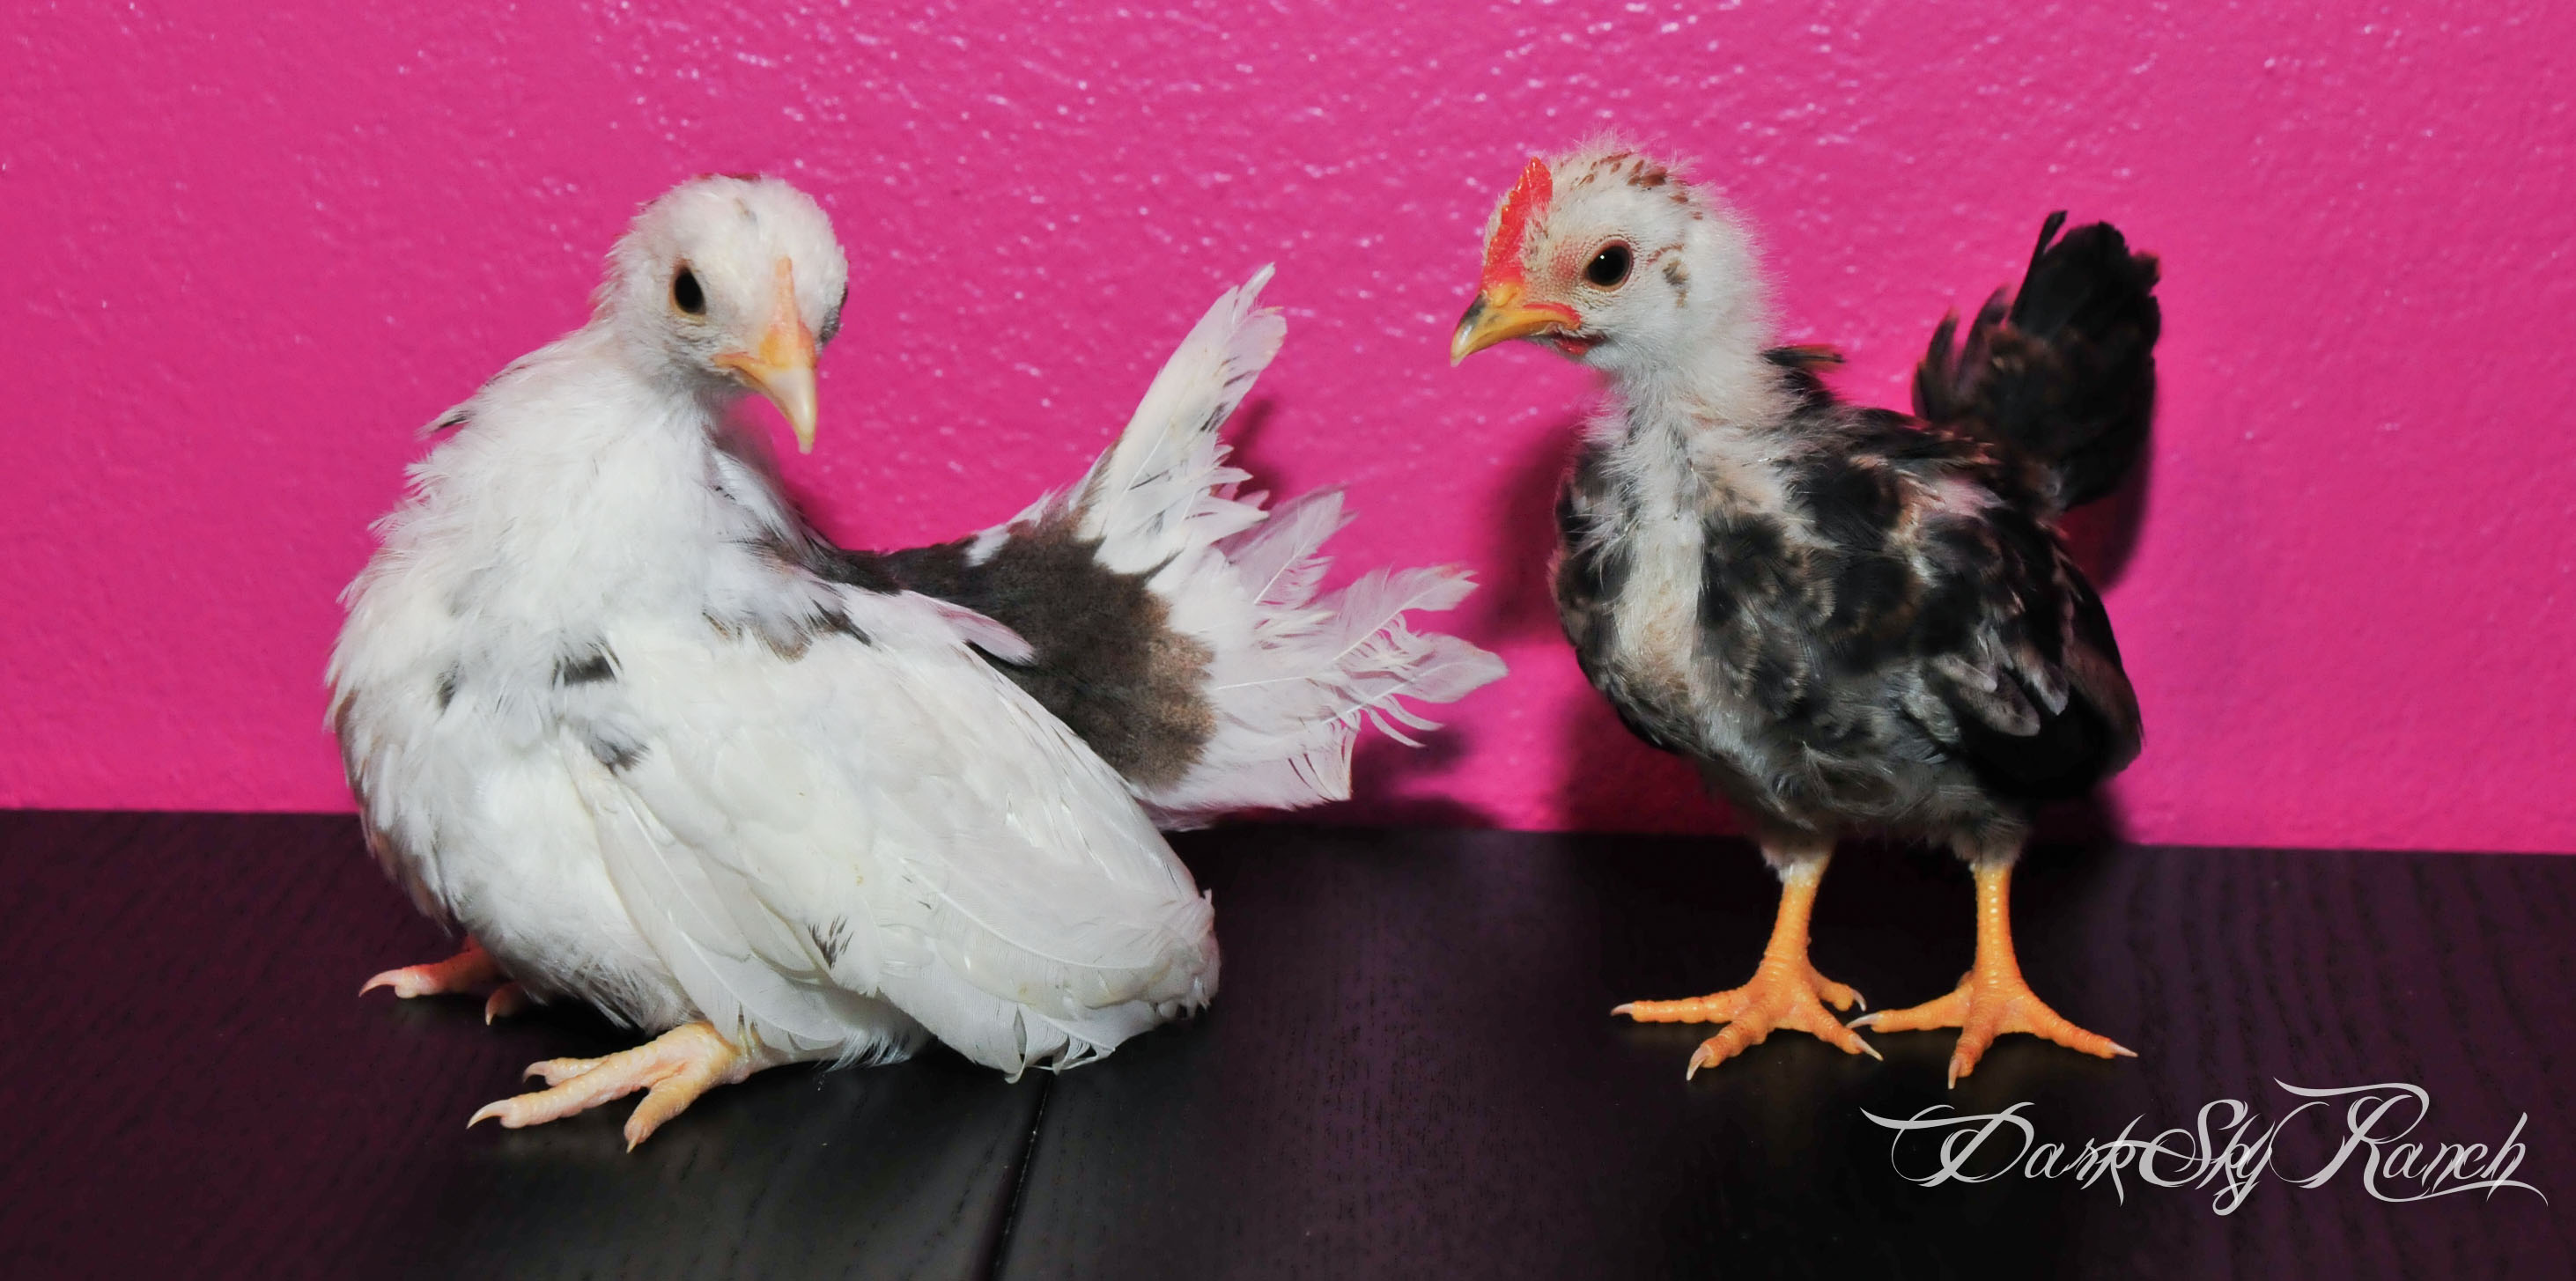 Here is my new Serama pullet from Jerry, she is 1 month old, you can see the difference in size from my little serama that is about 9 weeks here.